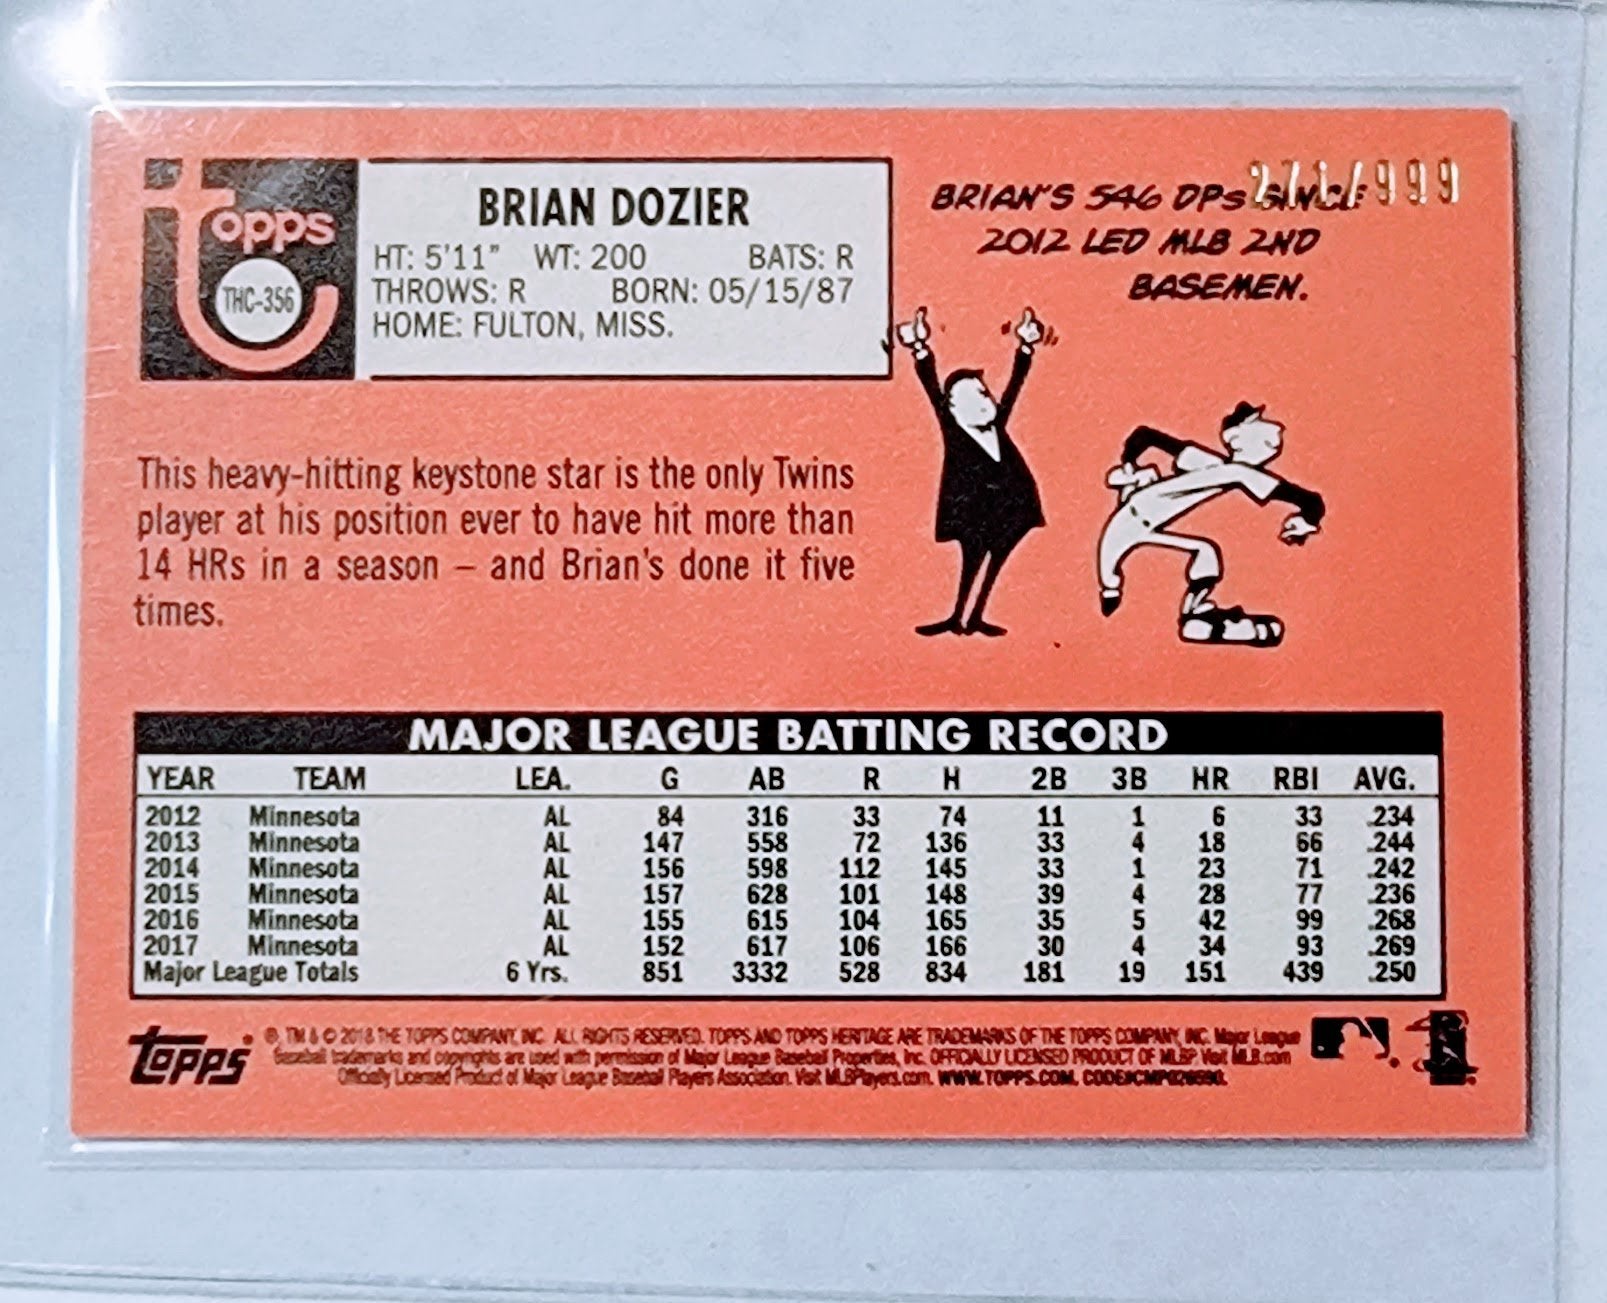 2018 Topps Heritage Brian Dozier Chrome #'d/999 Insert Baseball Card TPTV simple Xclusive Collectibles   